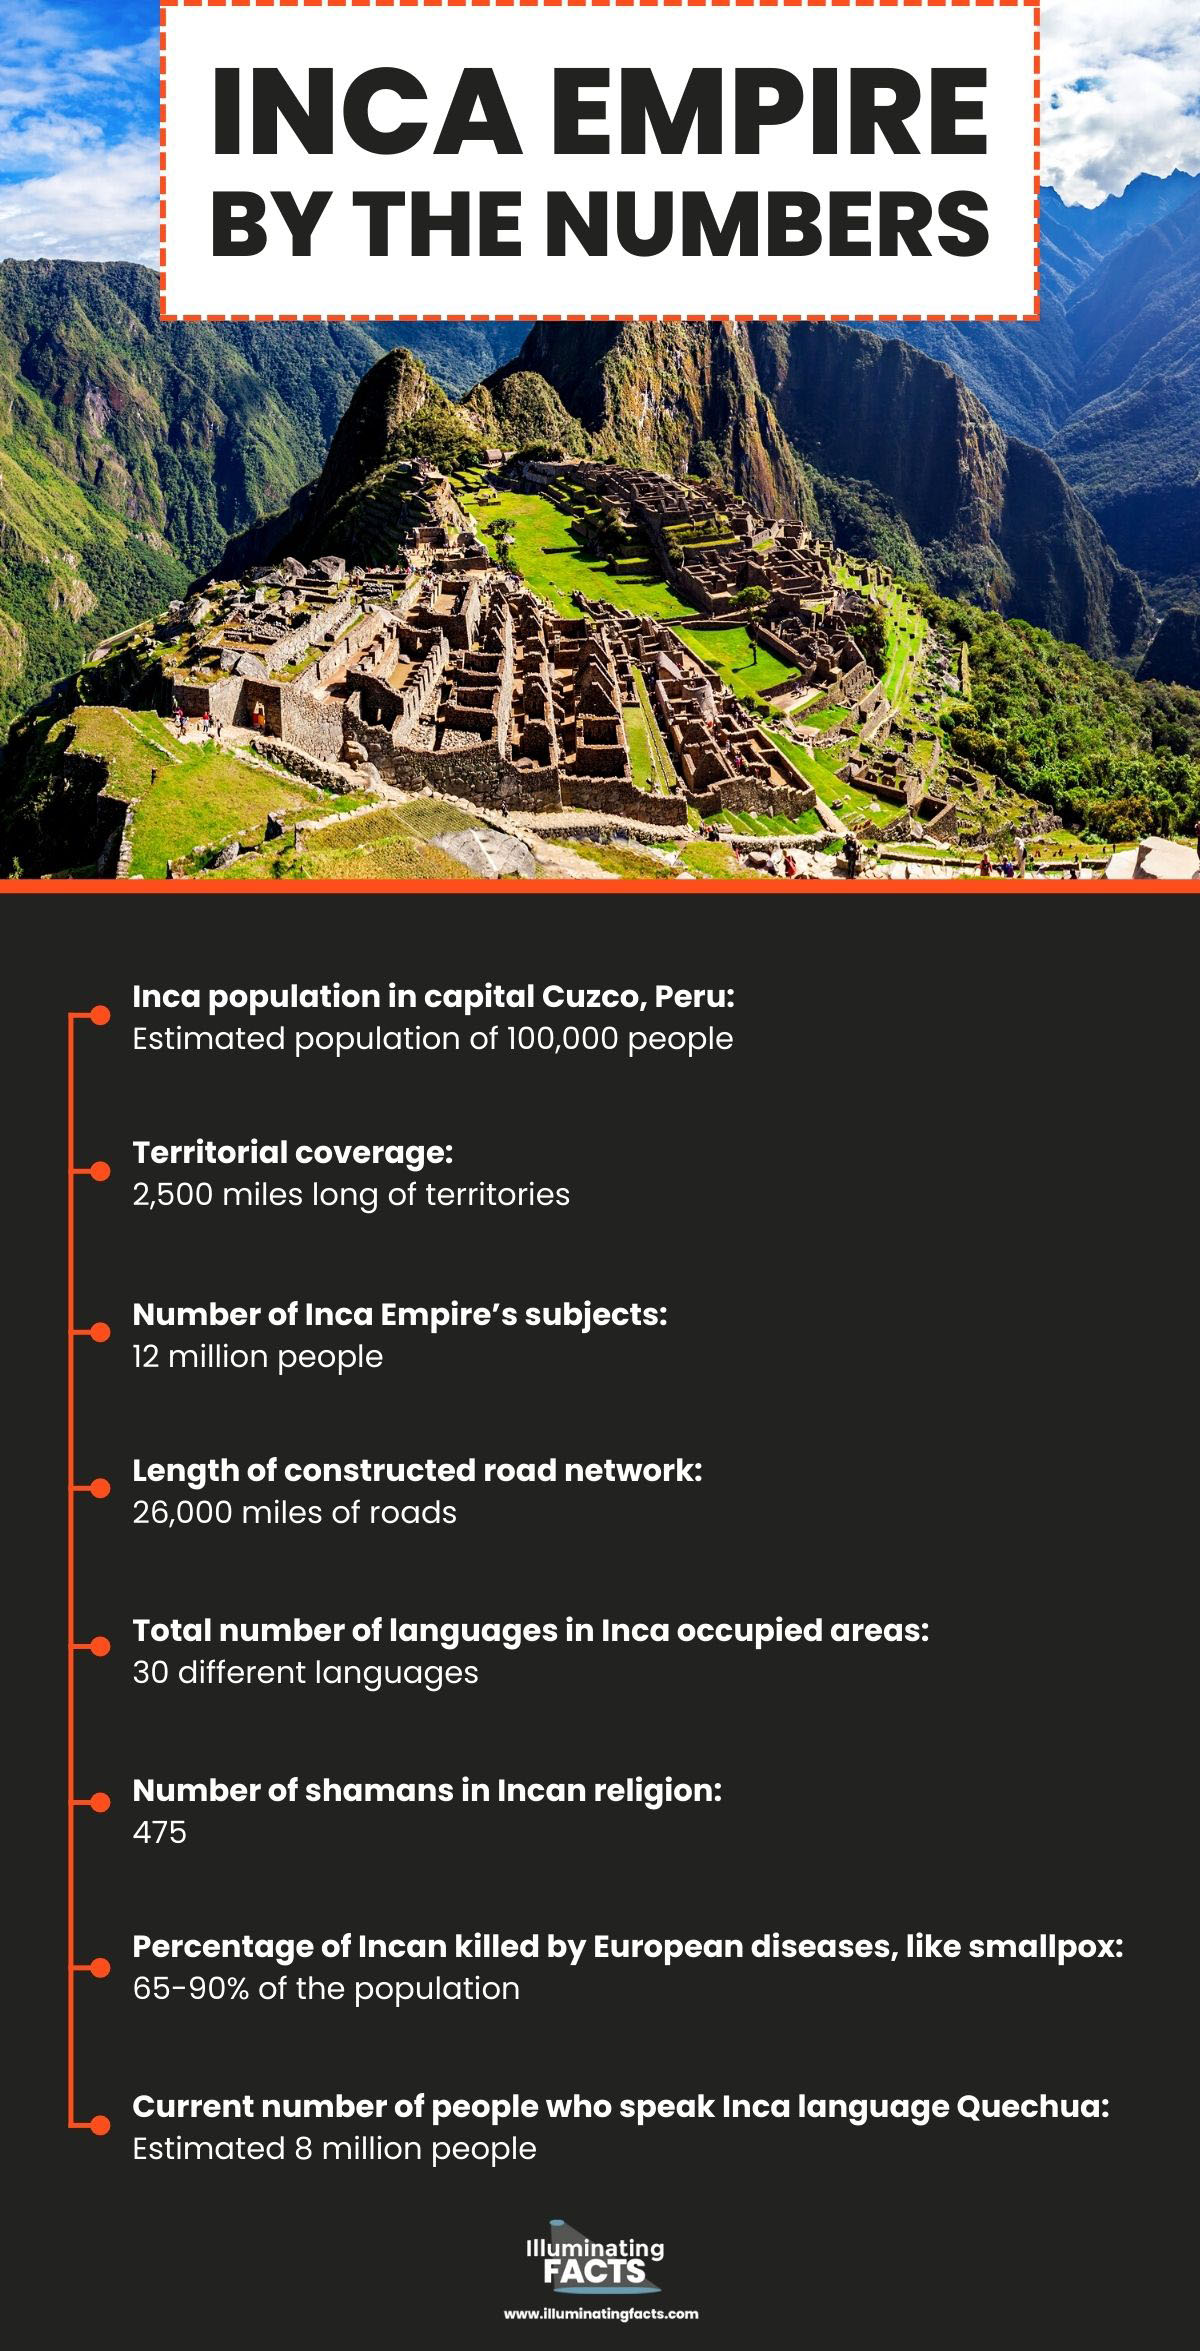 Inca Empire by the Numbers